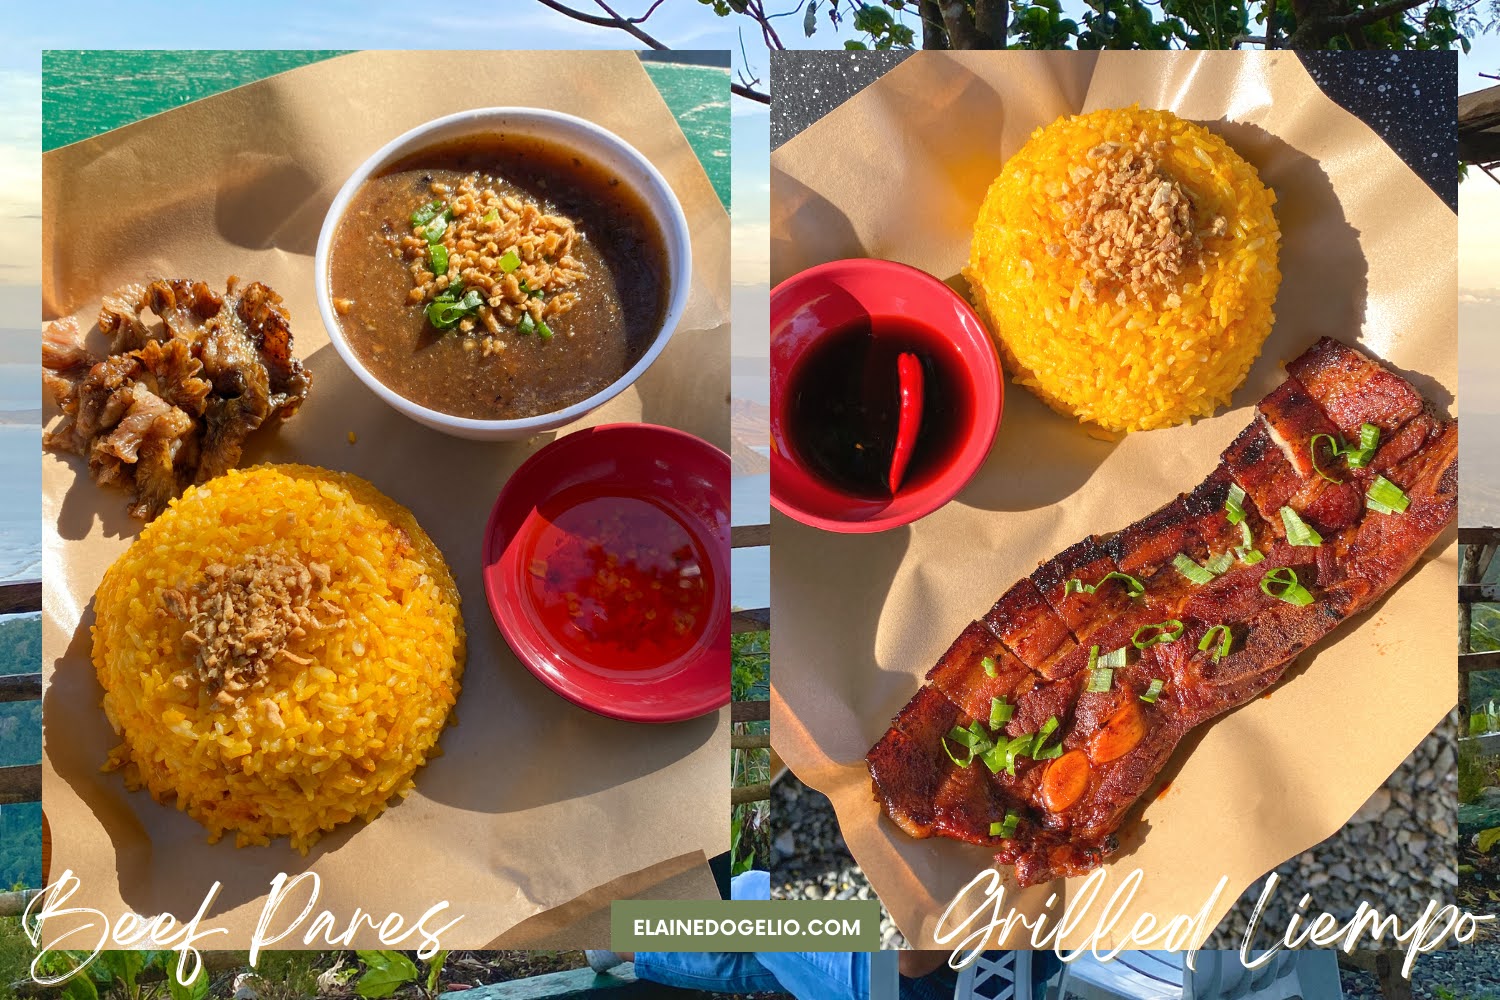 Enjoy Filipino Food and the Overlooking View of Taal Lake at Lawa Cafe